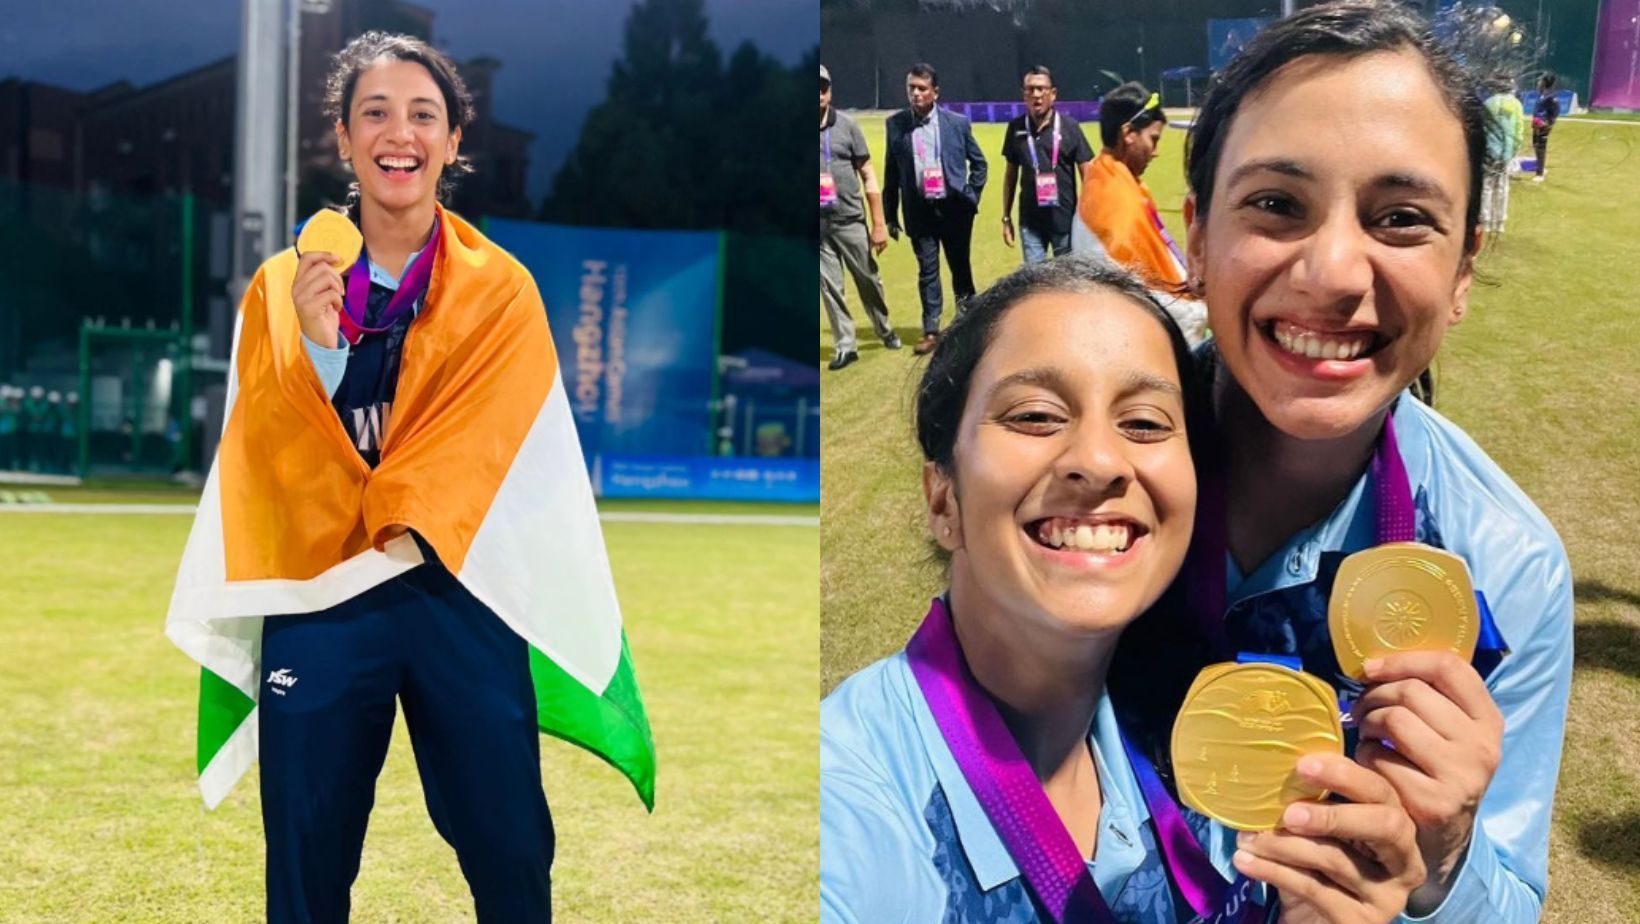 Smriti Mandhana and Jemimah Rodrigues with their gold medals on Monday. (PC: Instagram)